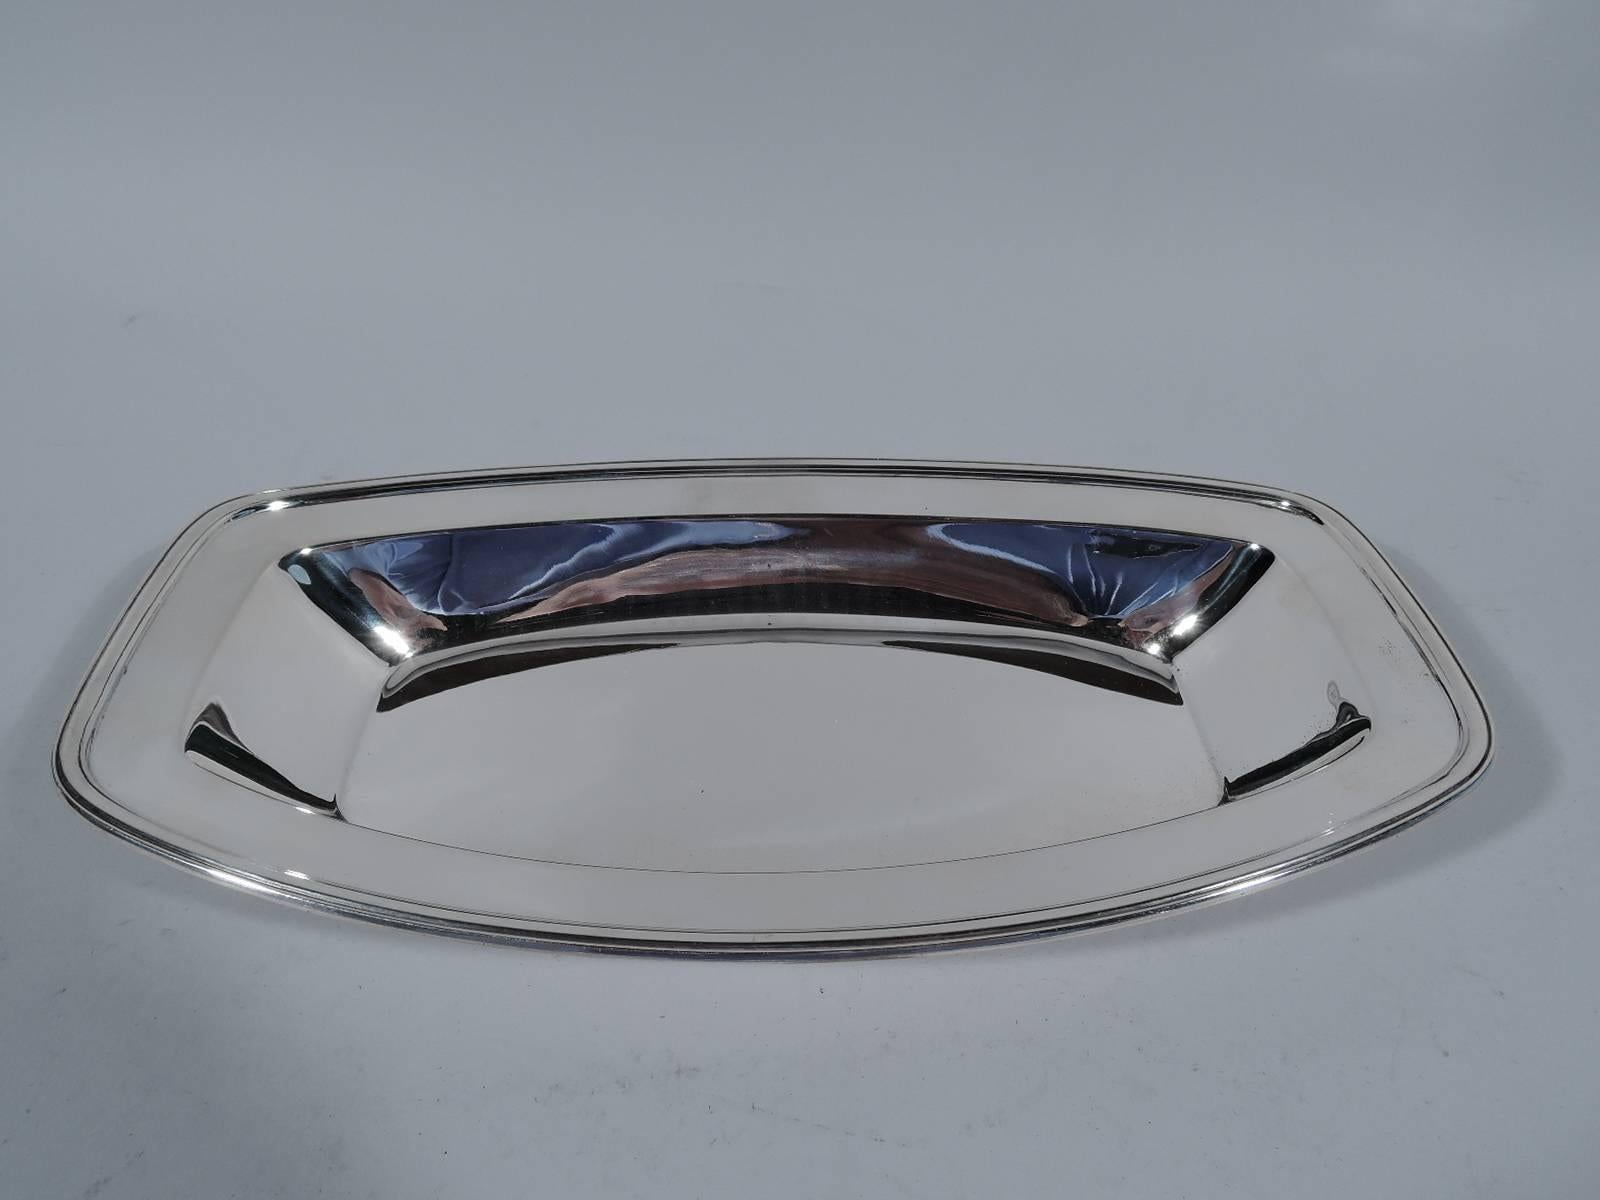 Smart sterling silver bread tray. Made by Tiffany & Co. in New York, circa 1927. Well has curved sides and truncated ends. Tapering sides with flat border and molded rim. Hallmark includes pattern no. 20942 (first produced in 1927) and director’s